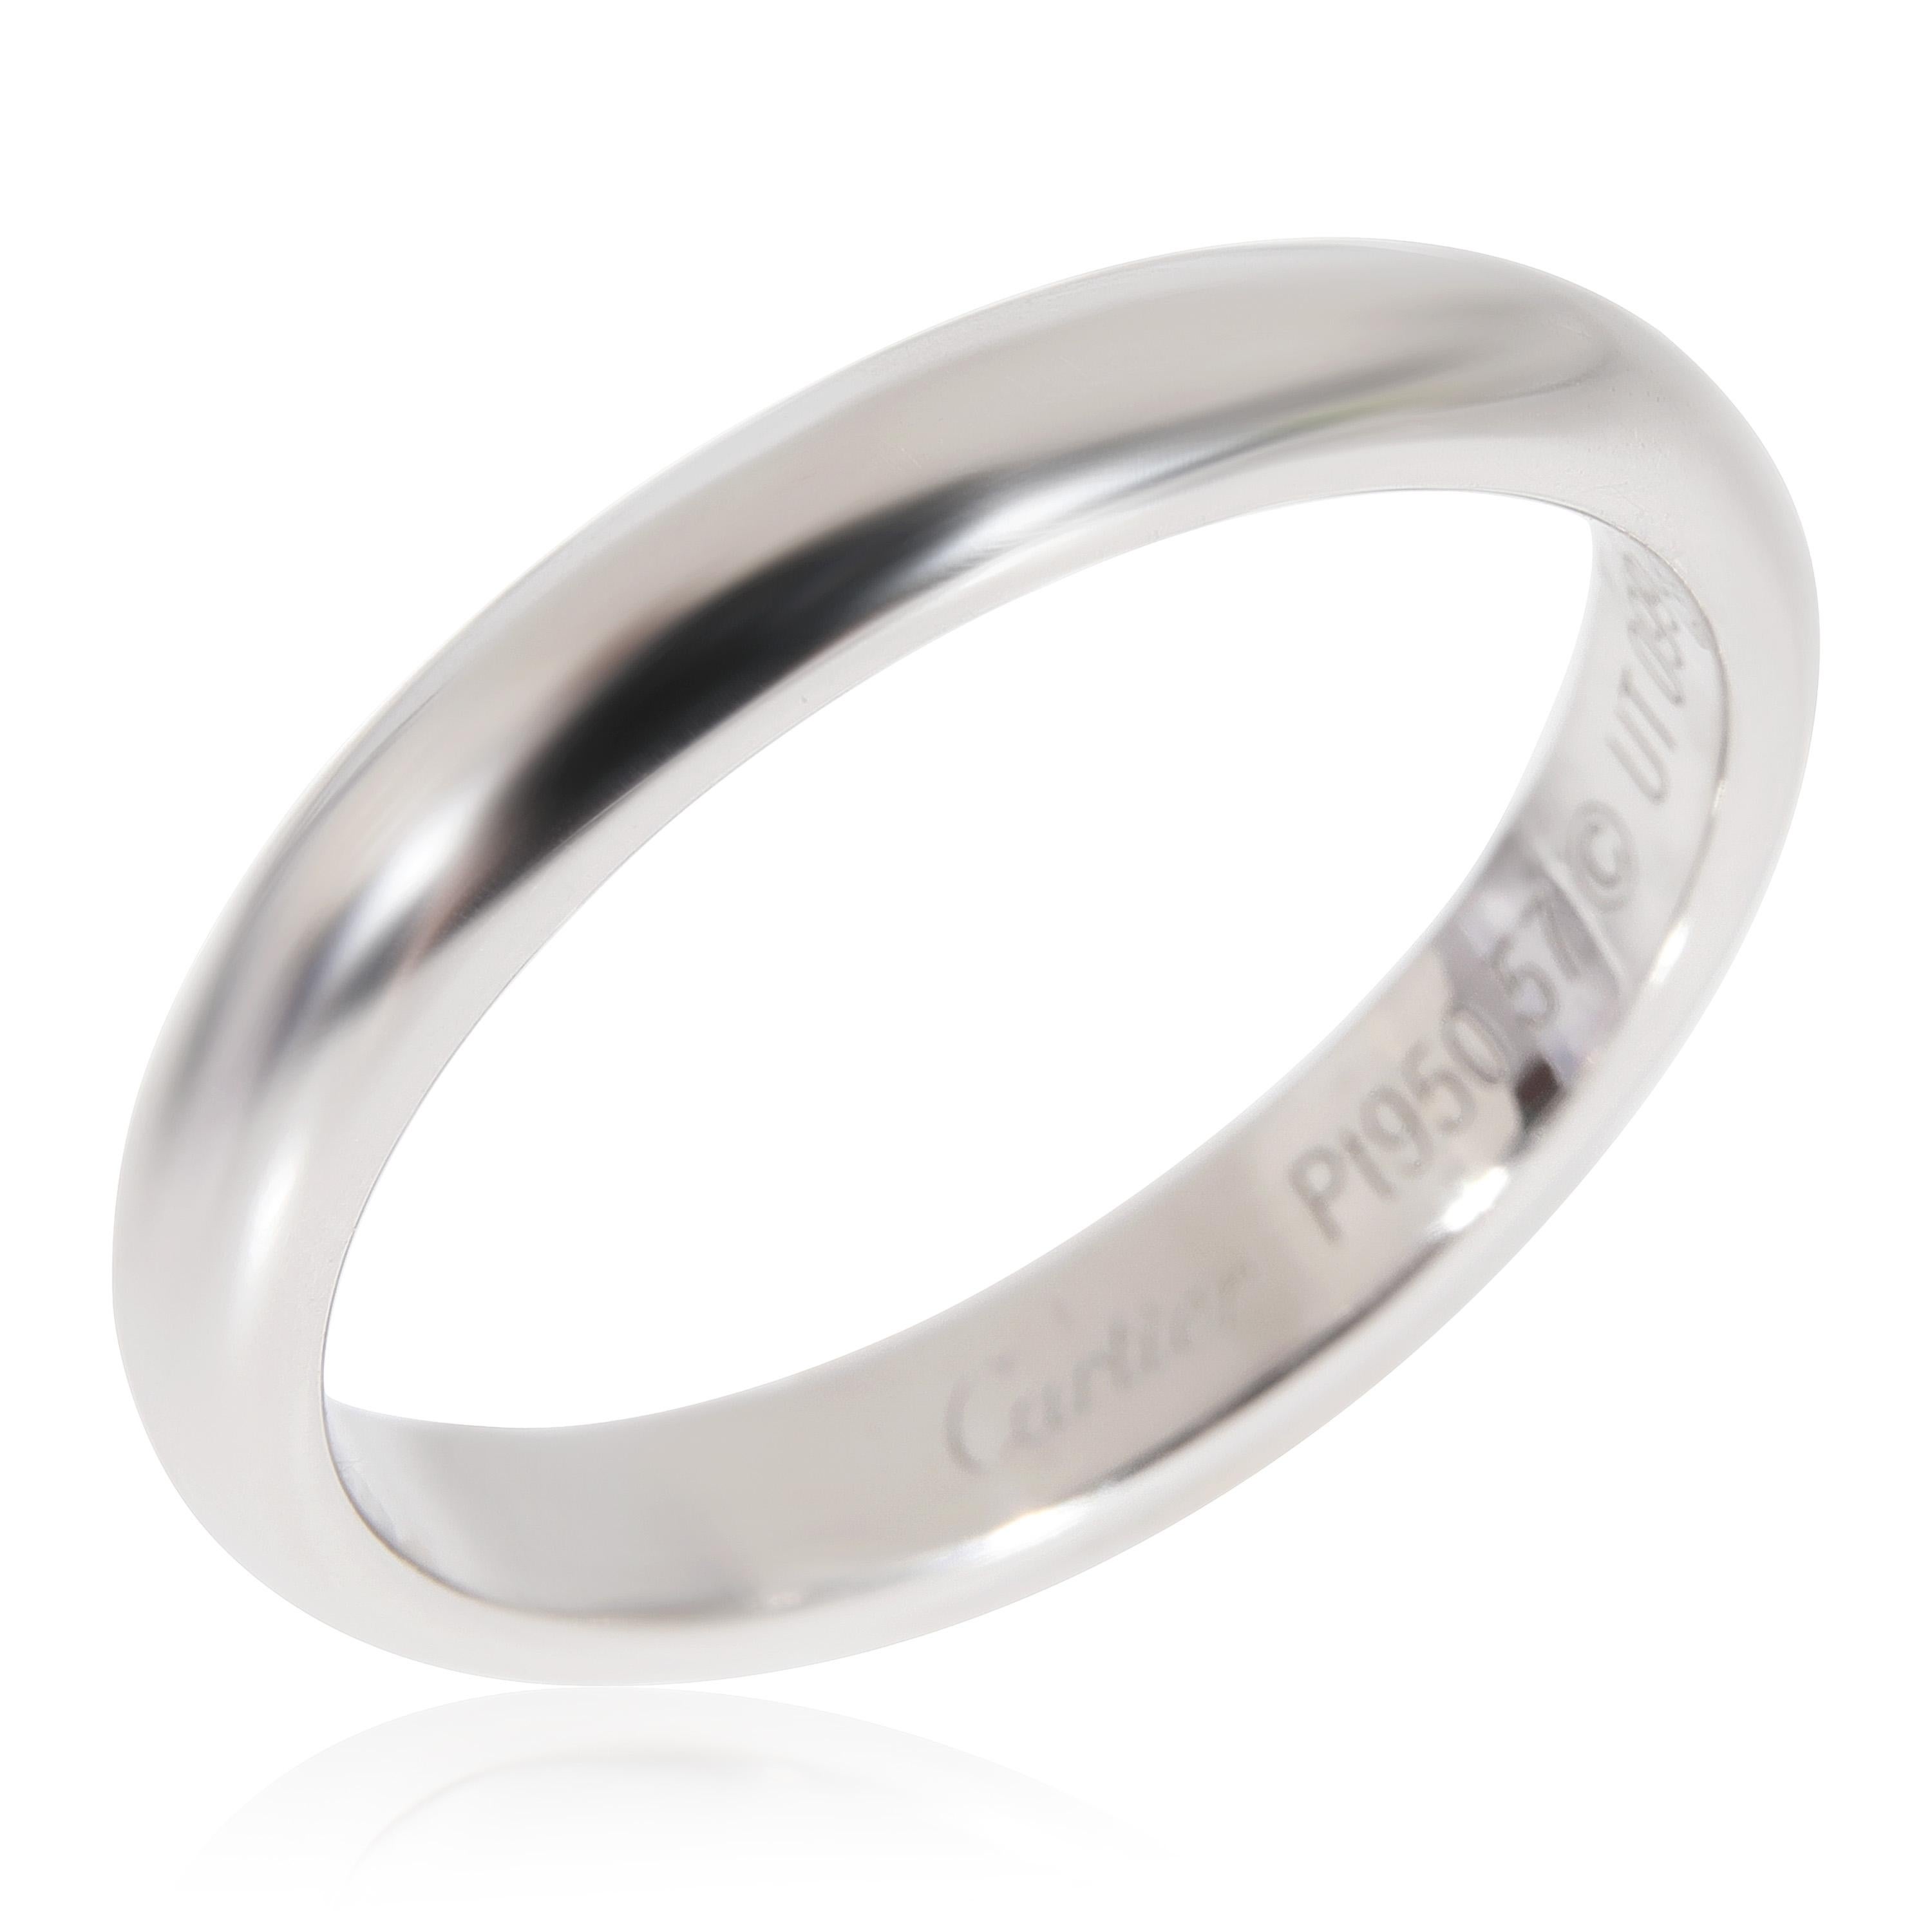 Cartier 1895 Wedding Band in Platinum

PRIMARY DETAILS
SKU: 121618
Listing Title: Cartier 1895 Wedding Band in Platinum
Condition Description: Retails for 1700 USD. In excellent condition and recently polished. Ring size is 8.0.
Brand: